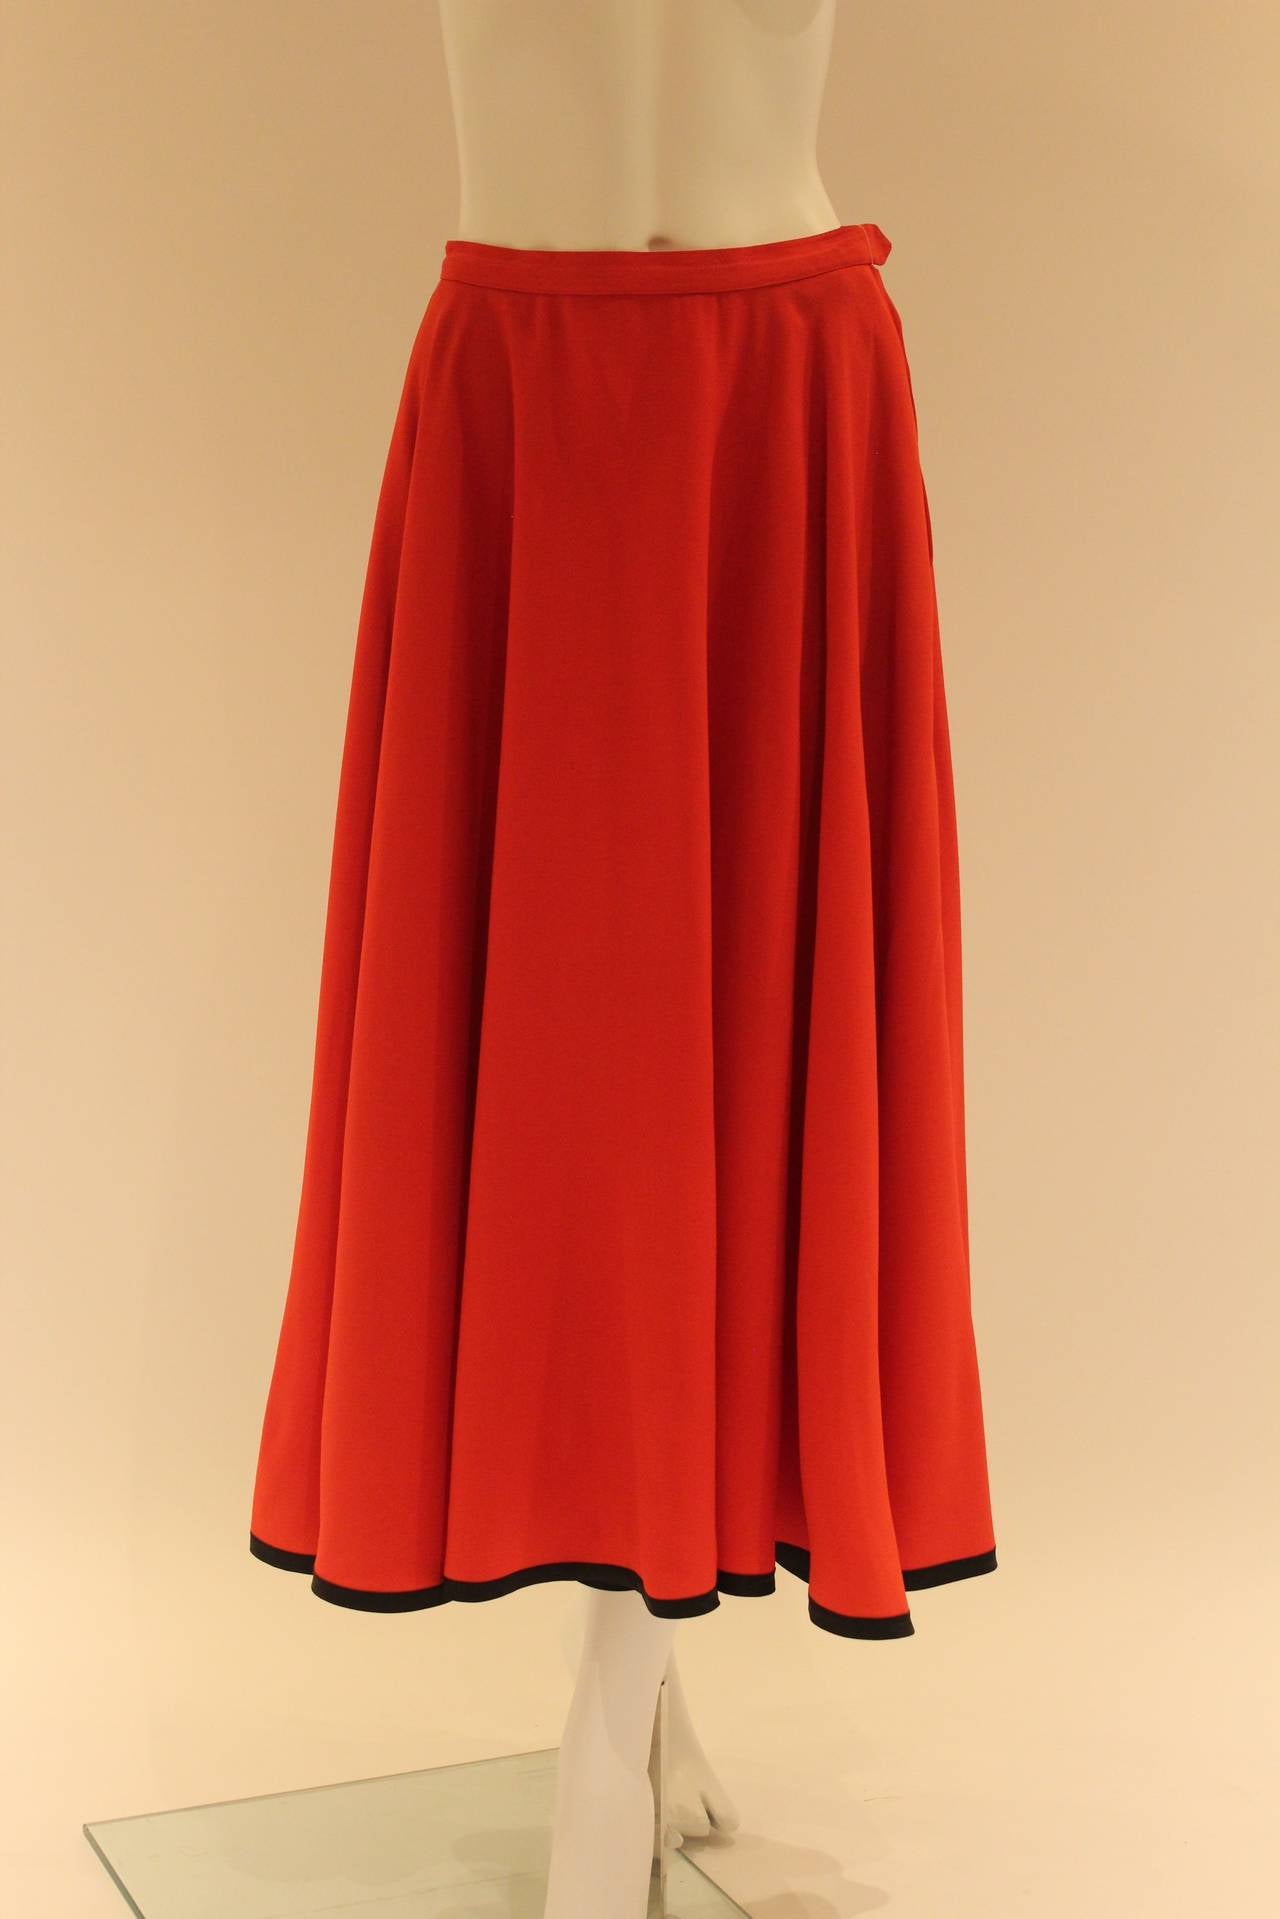 Yves Saint Laurent Rive Gauche Vintage Red Skirt In Excellent Condition In New York, NY